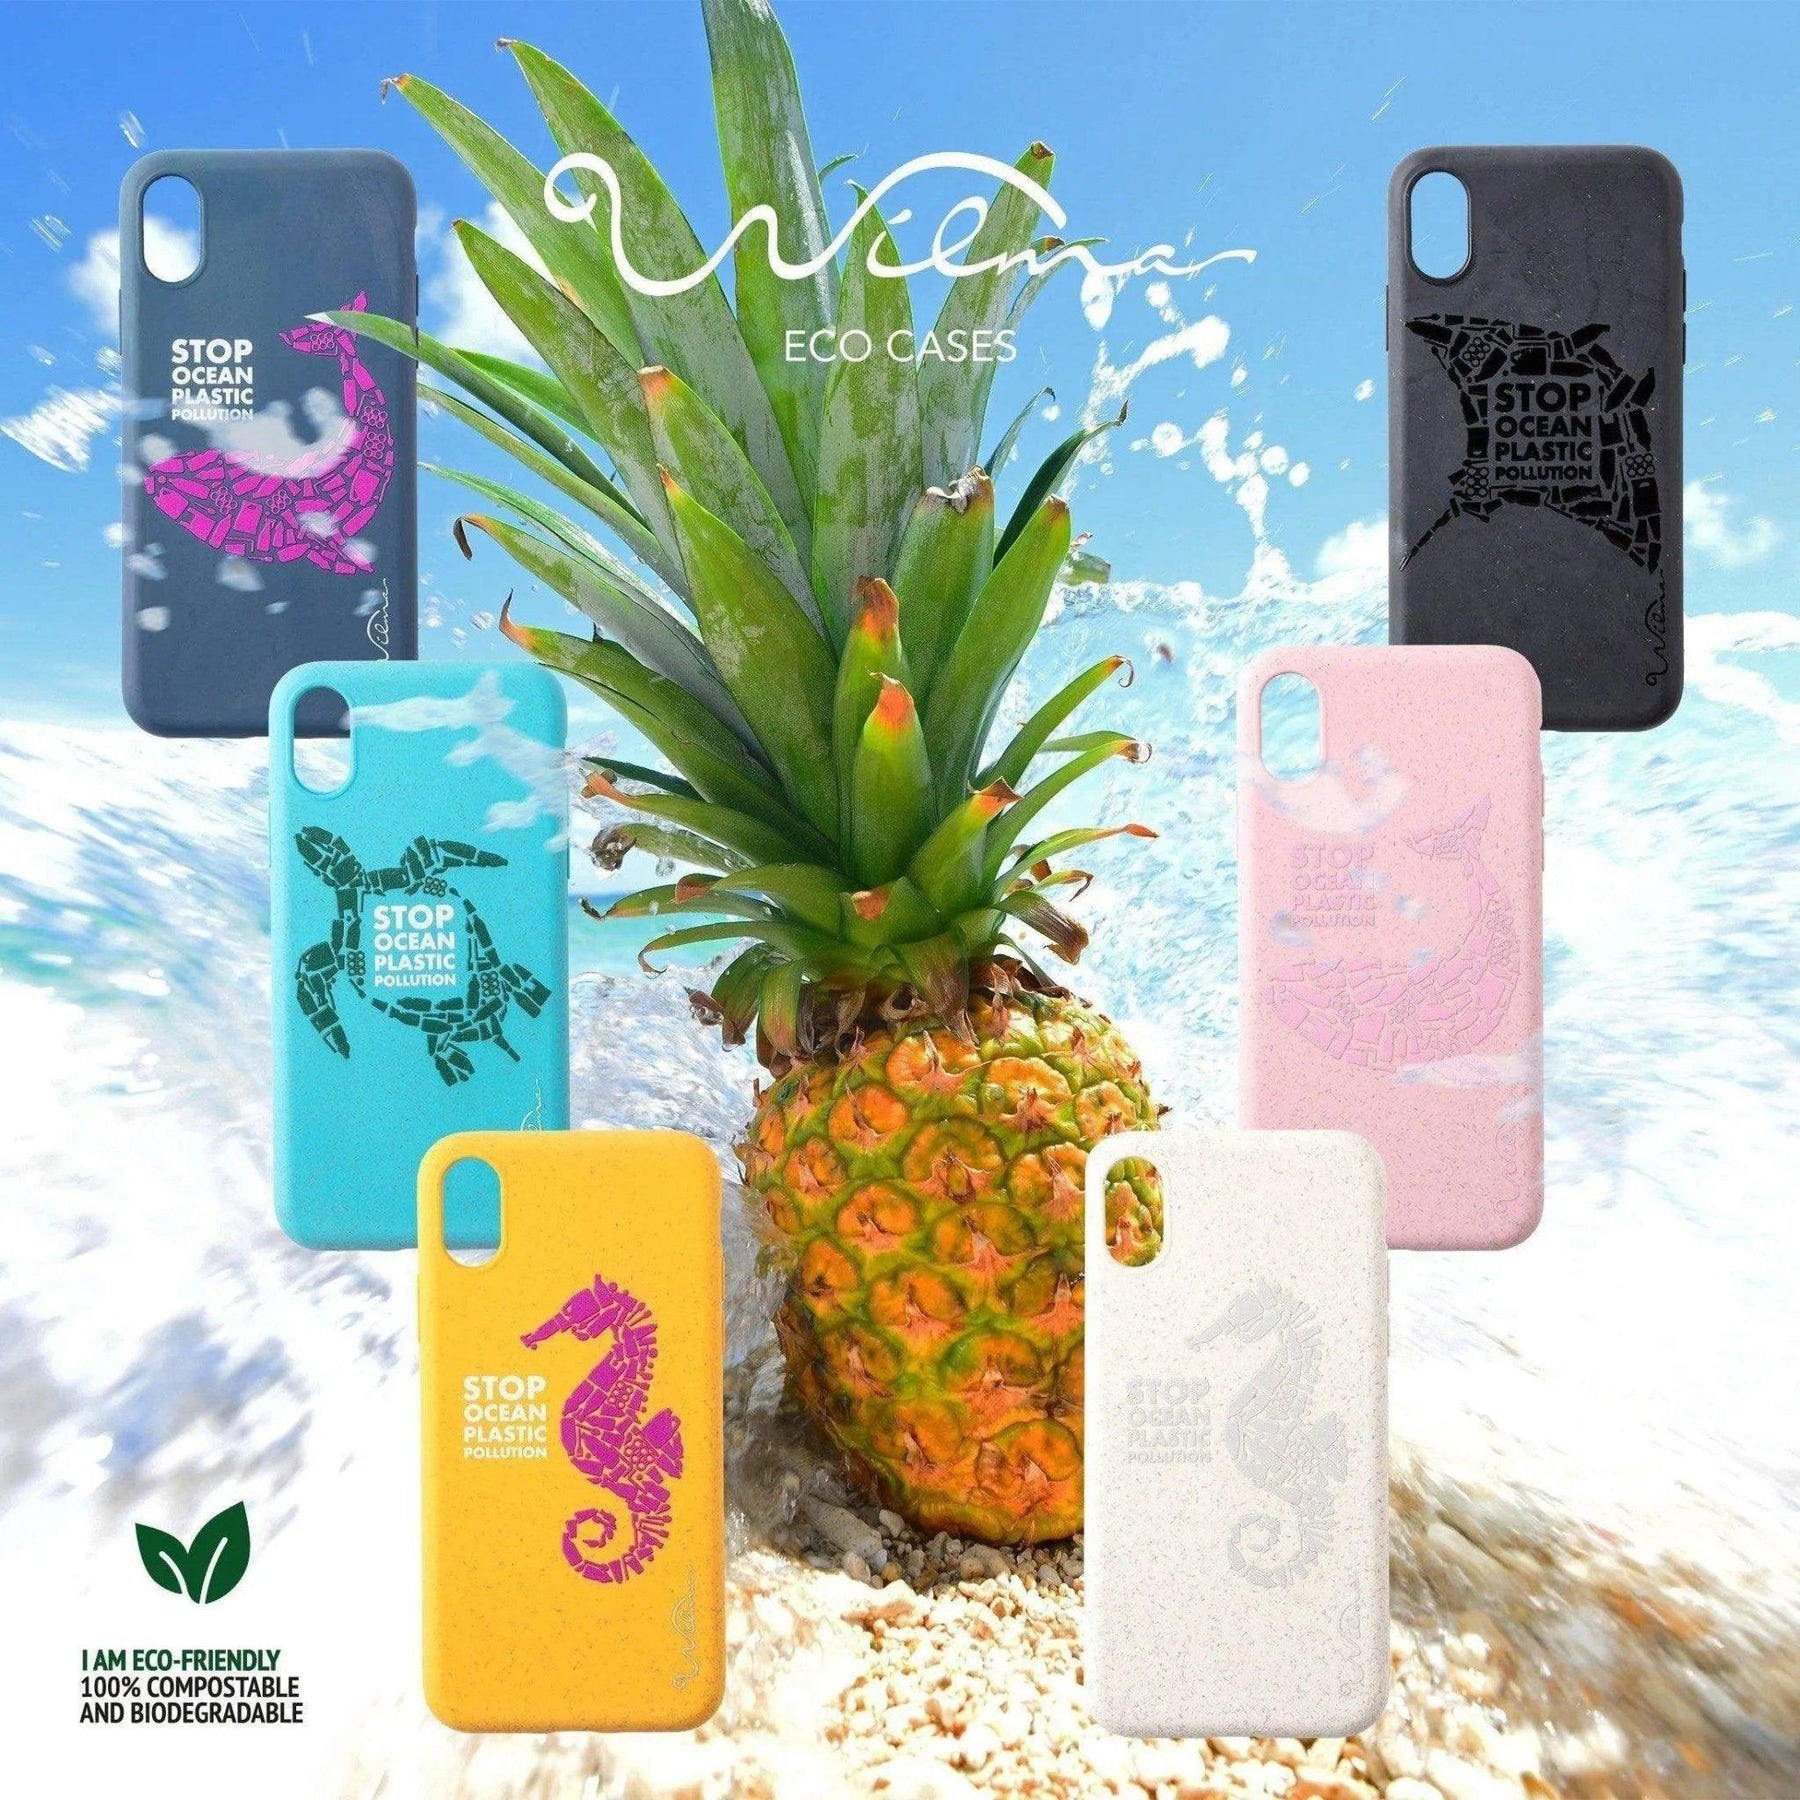 Introducing A biodegradable cell phone case - Solenco South Africa